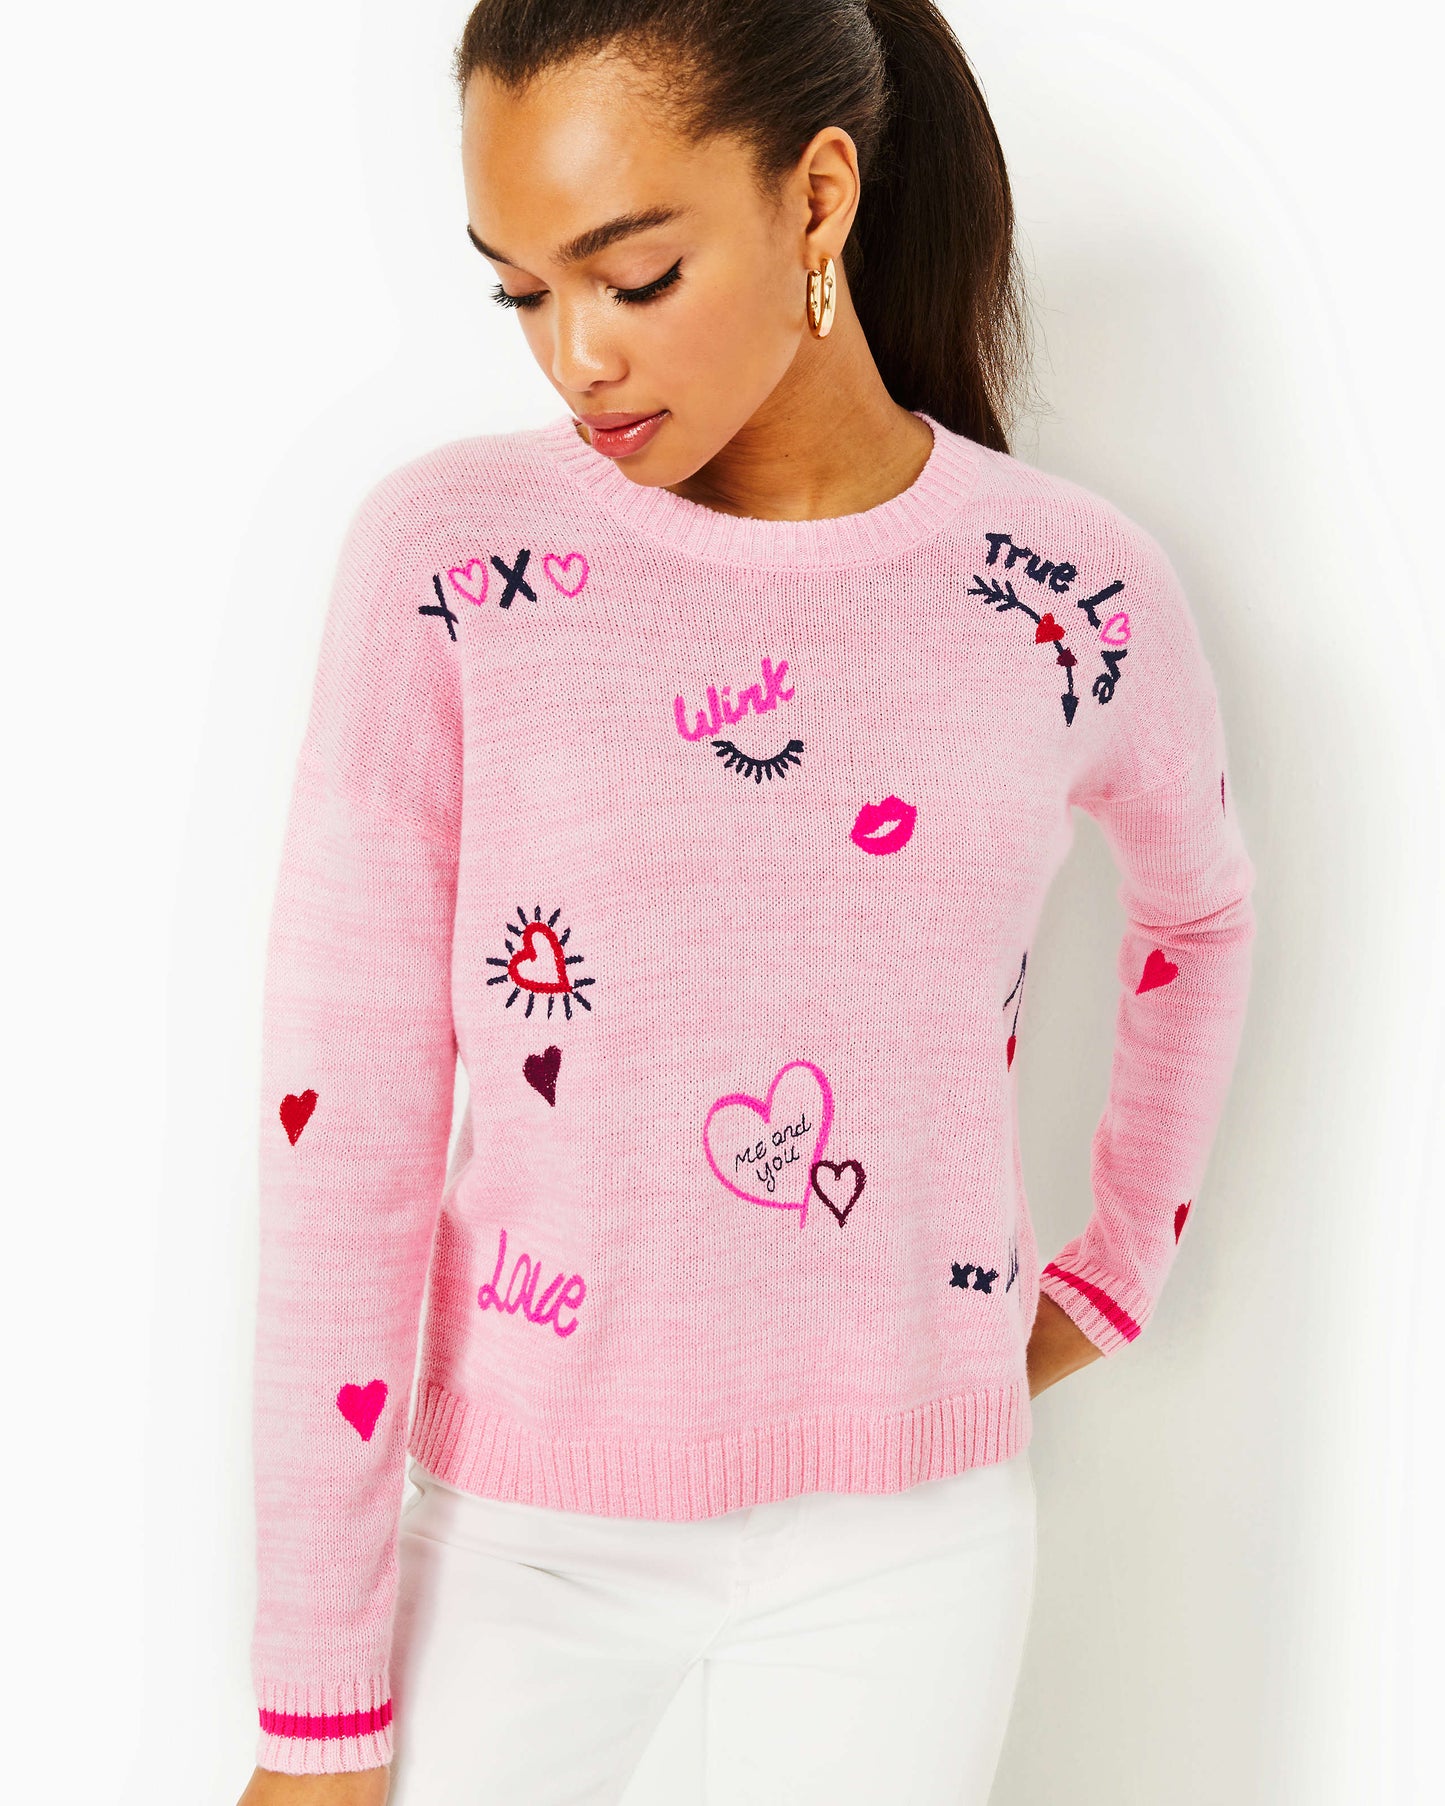 PIPPY SWEATER - HEATHERED PEONY PINK - VALENTINE EMBROIDERY